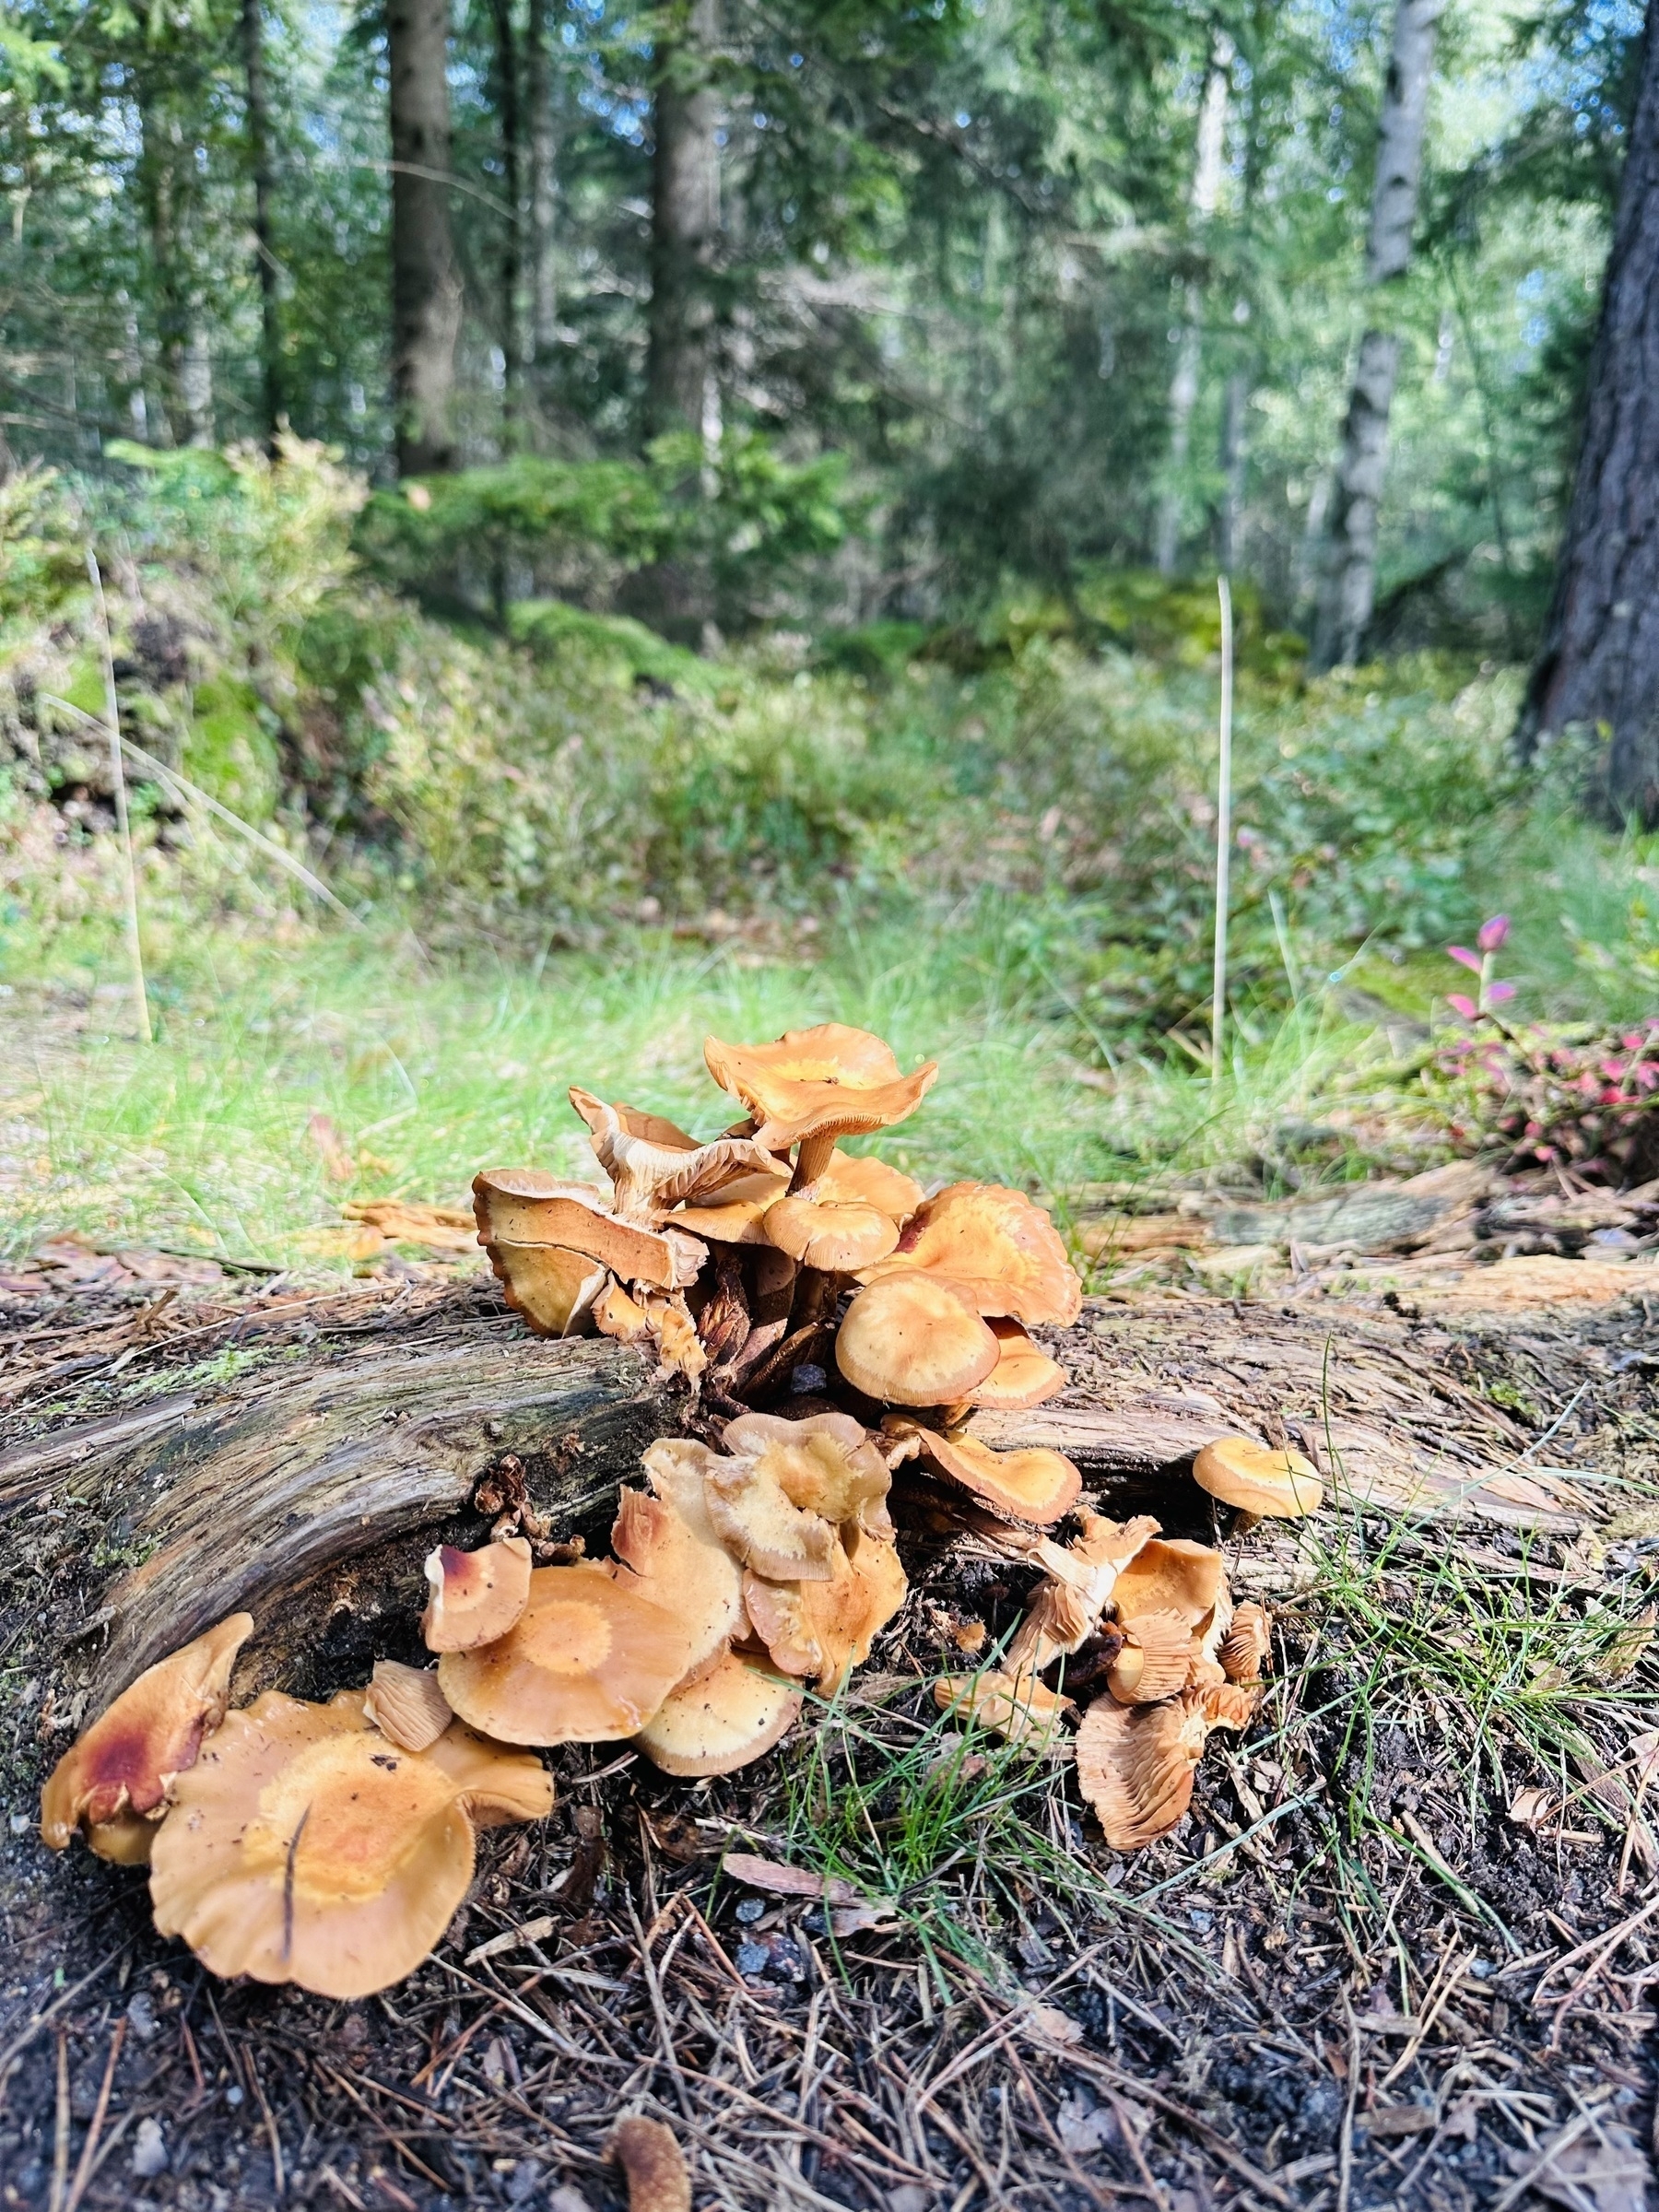 Mushrooms growing out of a log, with a forest in the background.